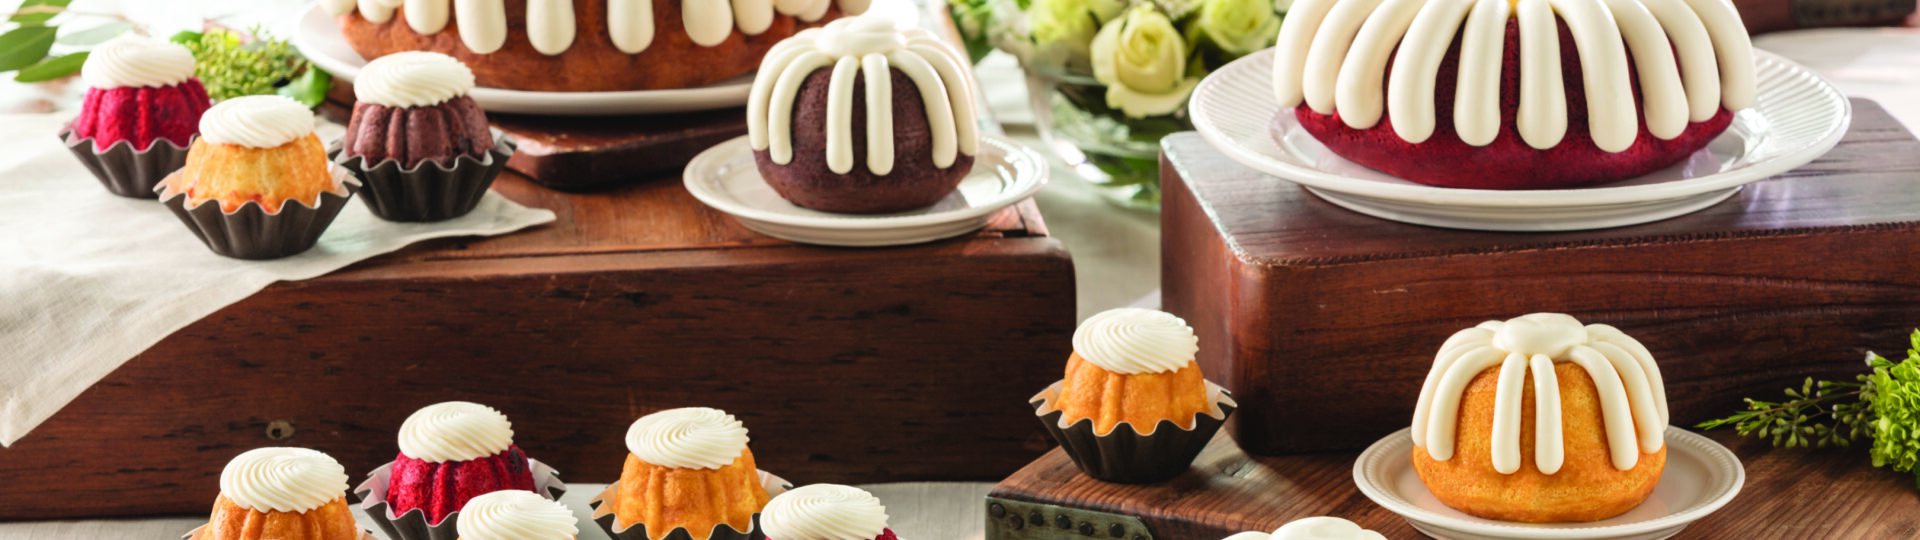 Bundt cakes nicely displayed with icing.